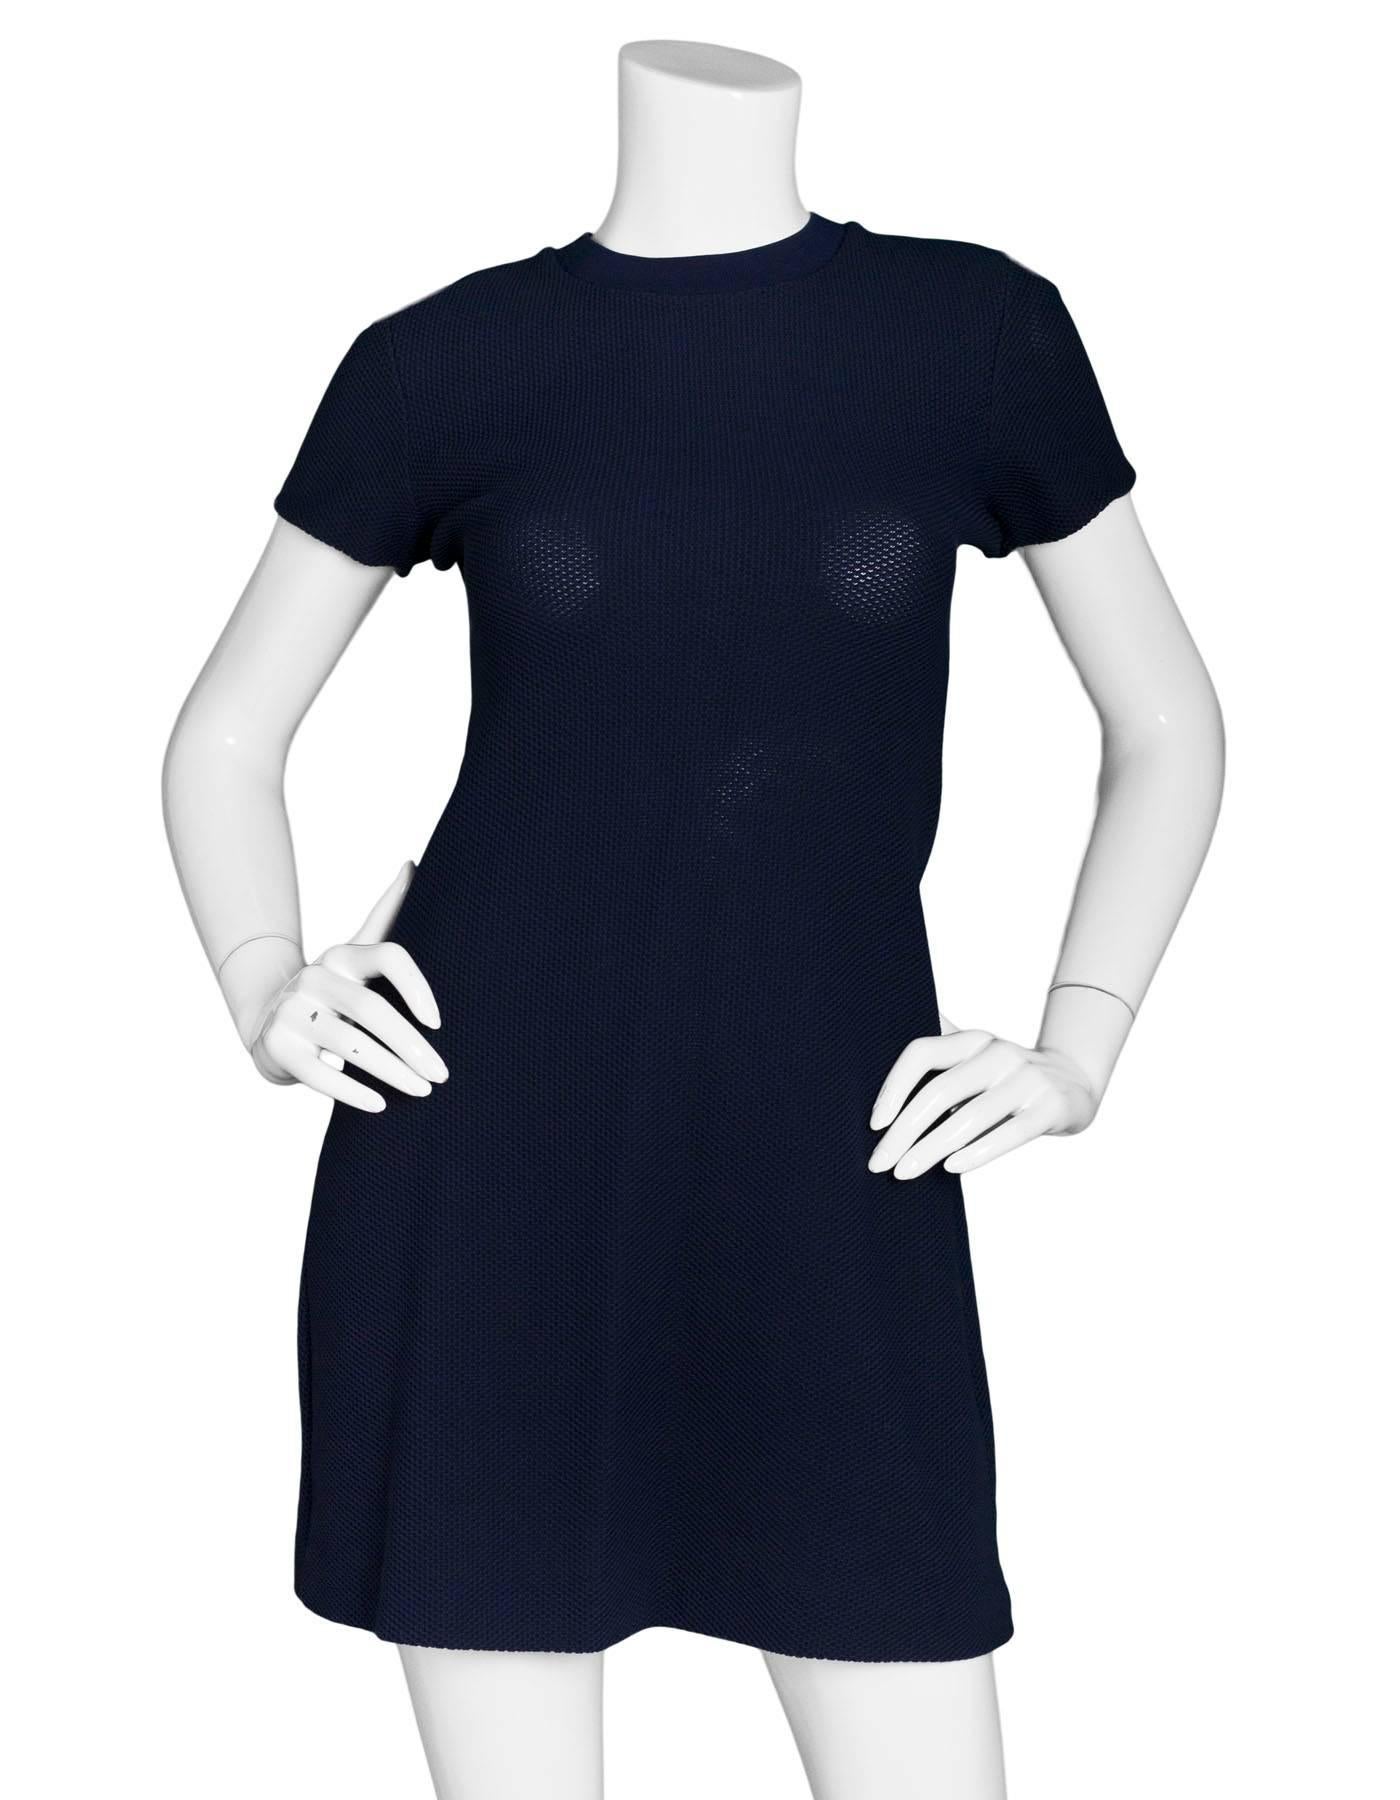 Acne Studios Navy Dress

Made In: Portugal
Color: Navy
Composition: Not listed, feels like cotton blend
Closure/Opening: Pull-over
Exterior Pockets: None
Interior Pockets: None
Overall Condition: Excellent pre-owne condition with the exception of